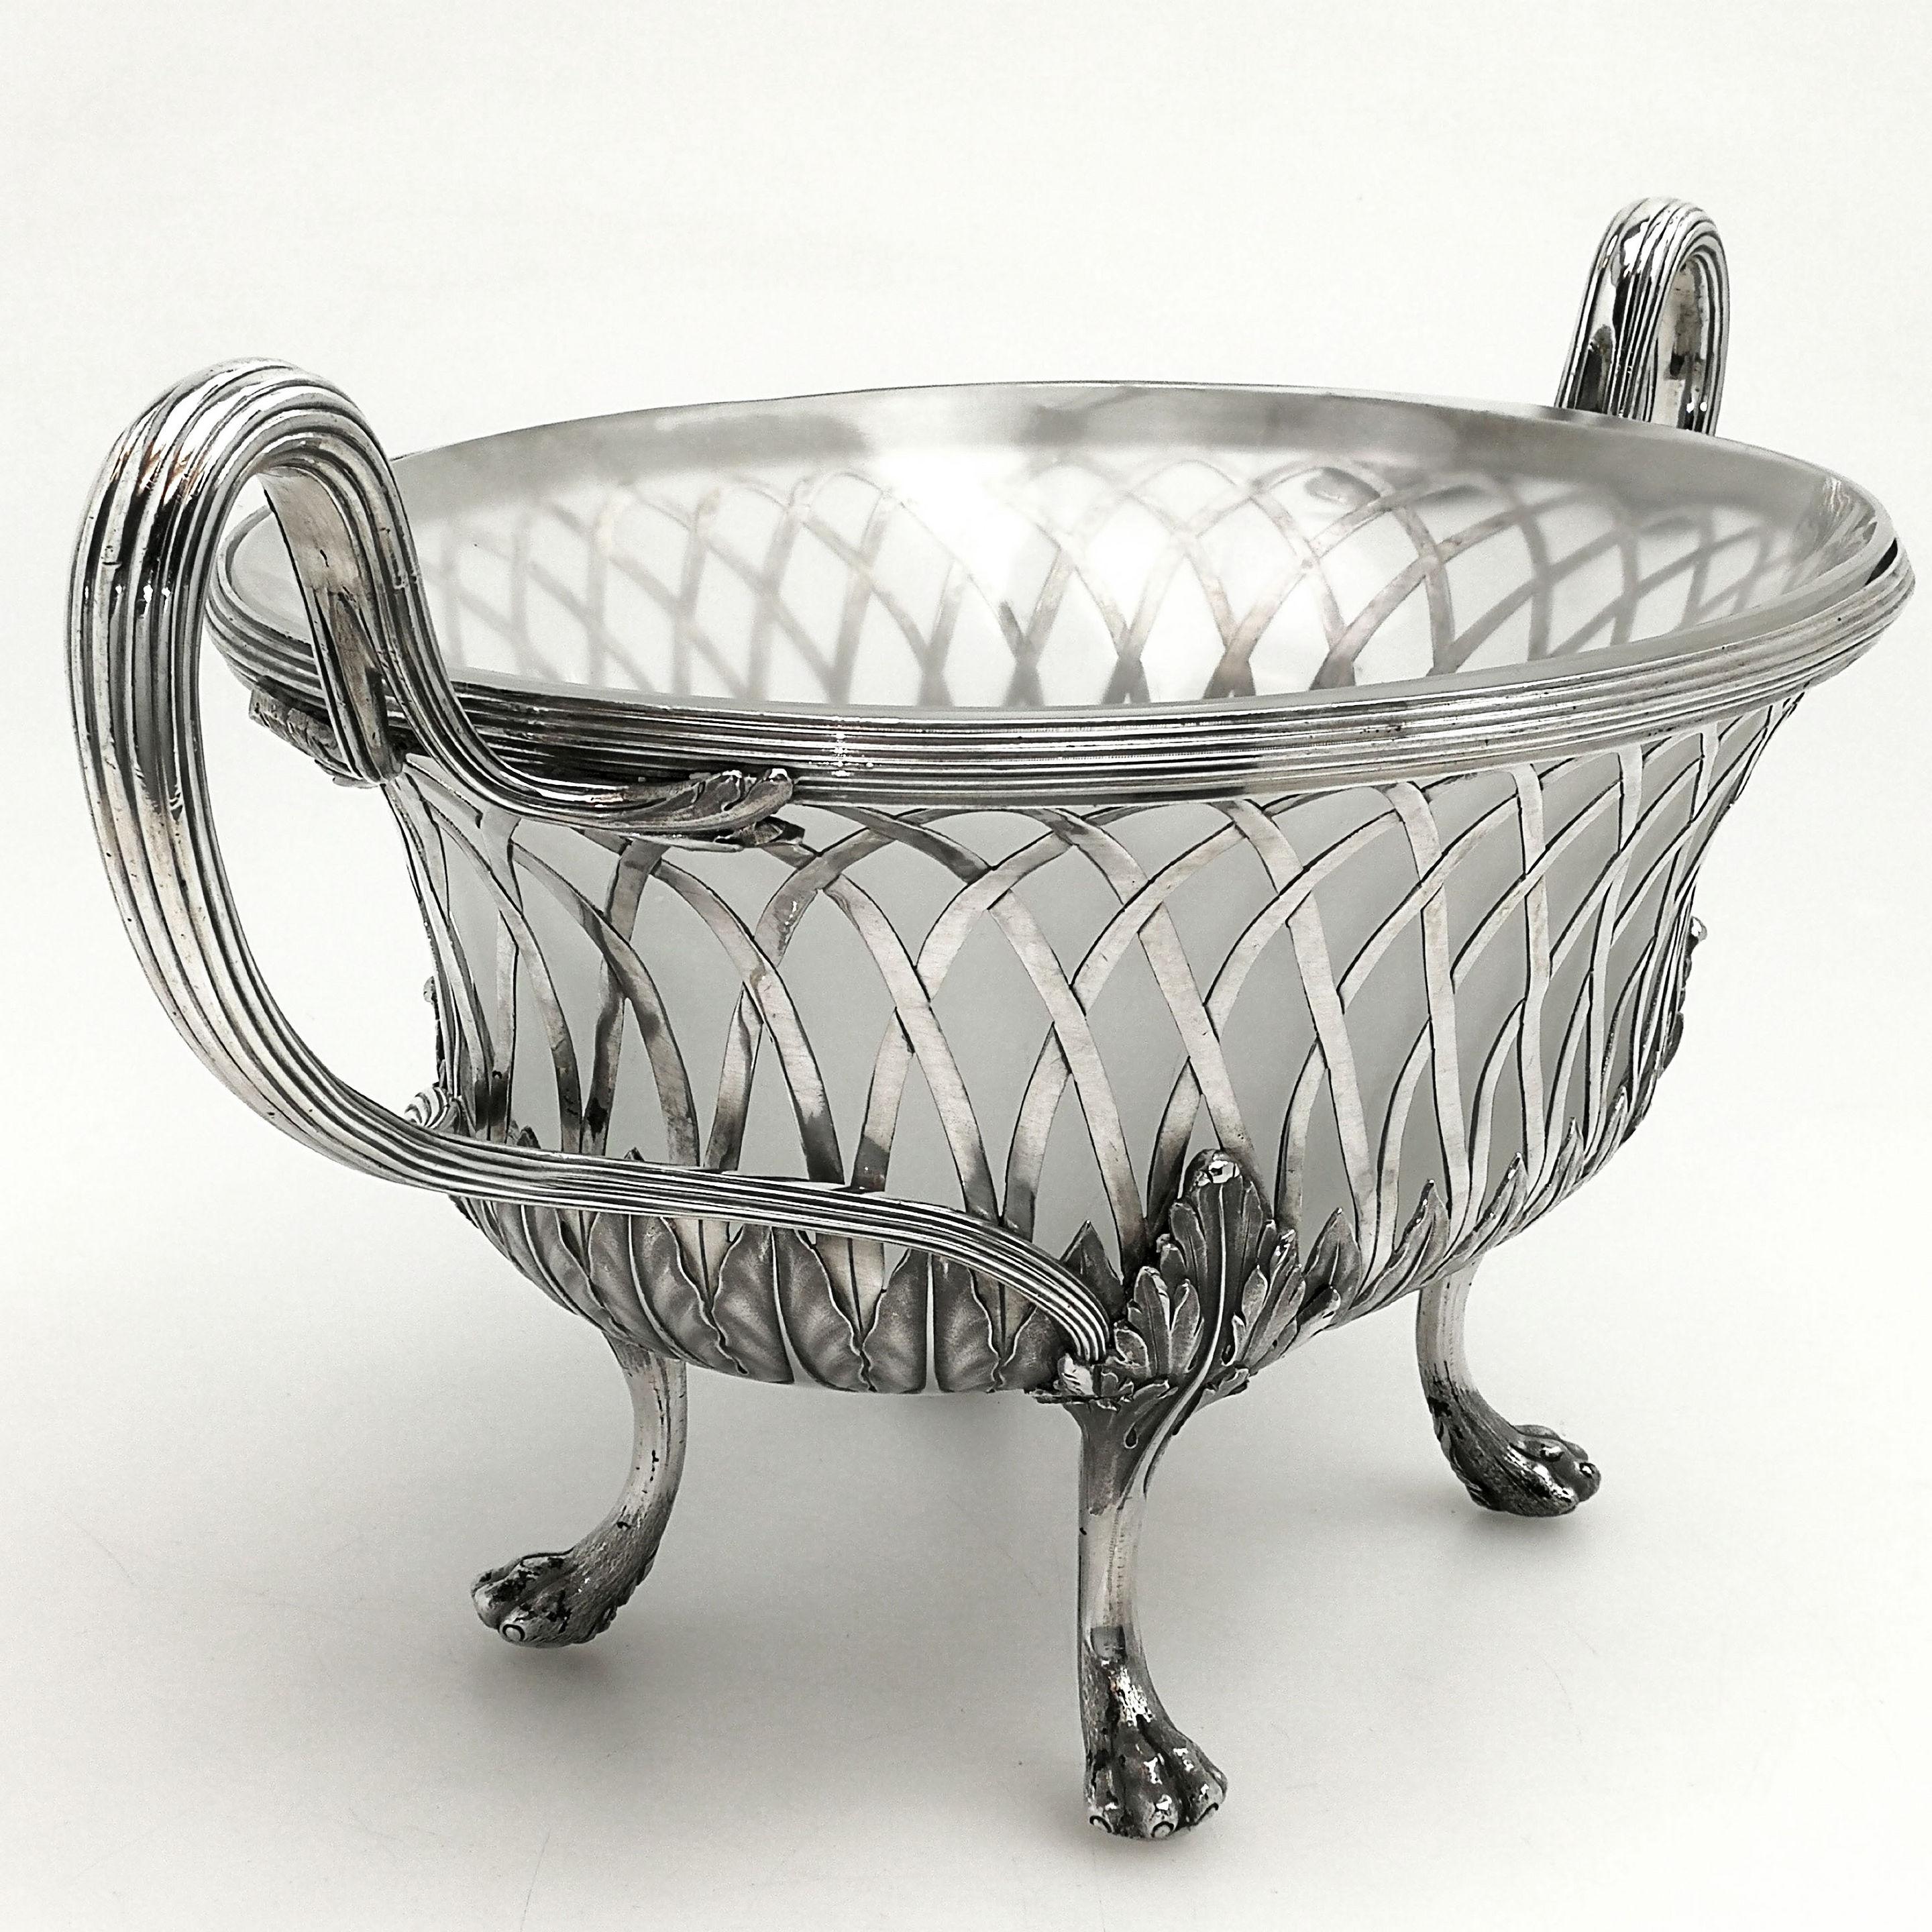 A rare George III Antique sterling Silver  Basket with a frosted white glass liner. The Georgian dessert serving Basket stands on four claw feet with acanthus leaf mounts. The base of the basket has an applied leaf border. The glass liner is of